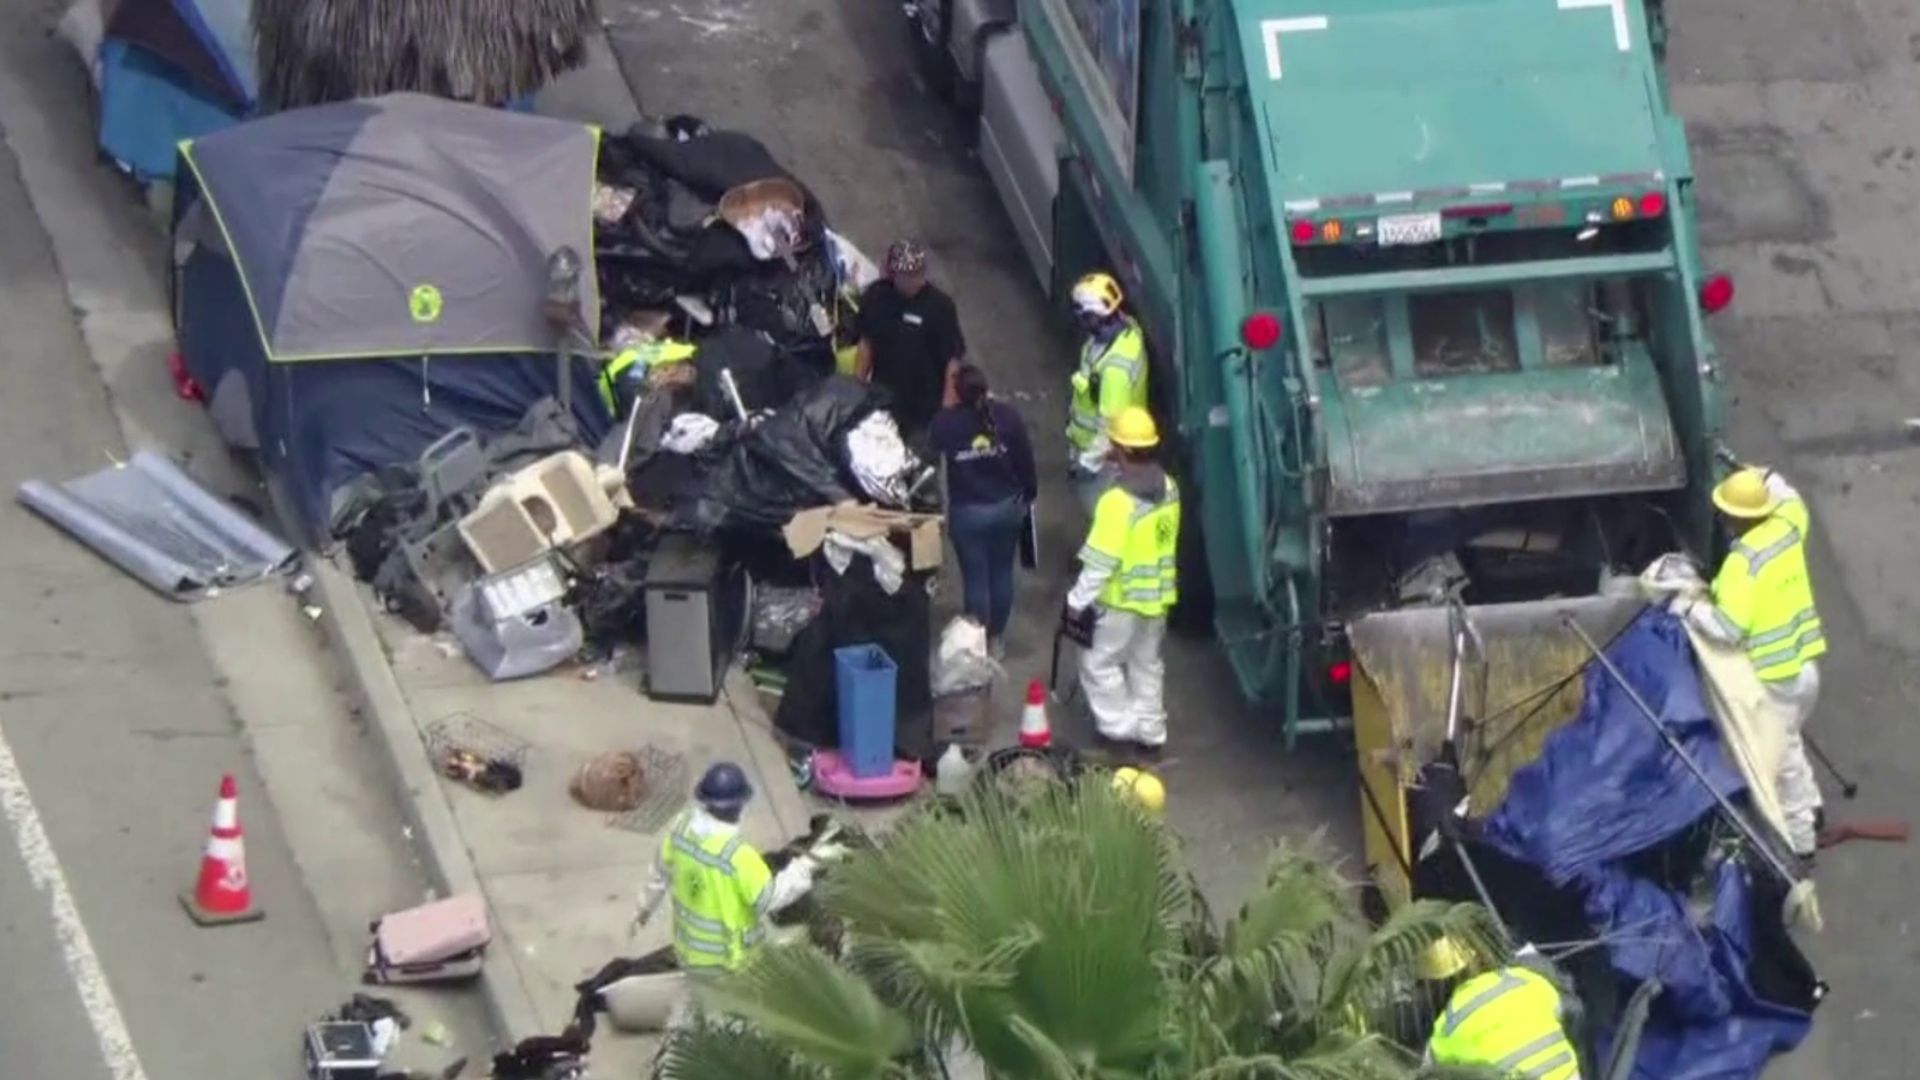 Beverly Grove encampment cleared by city